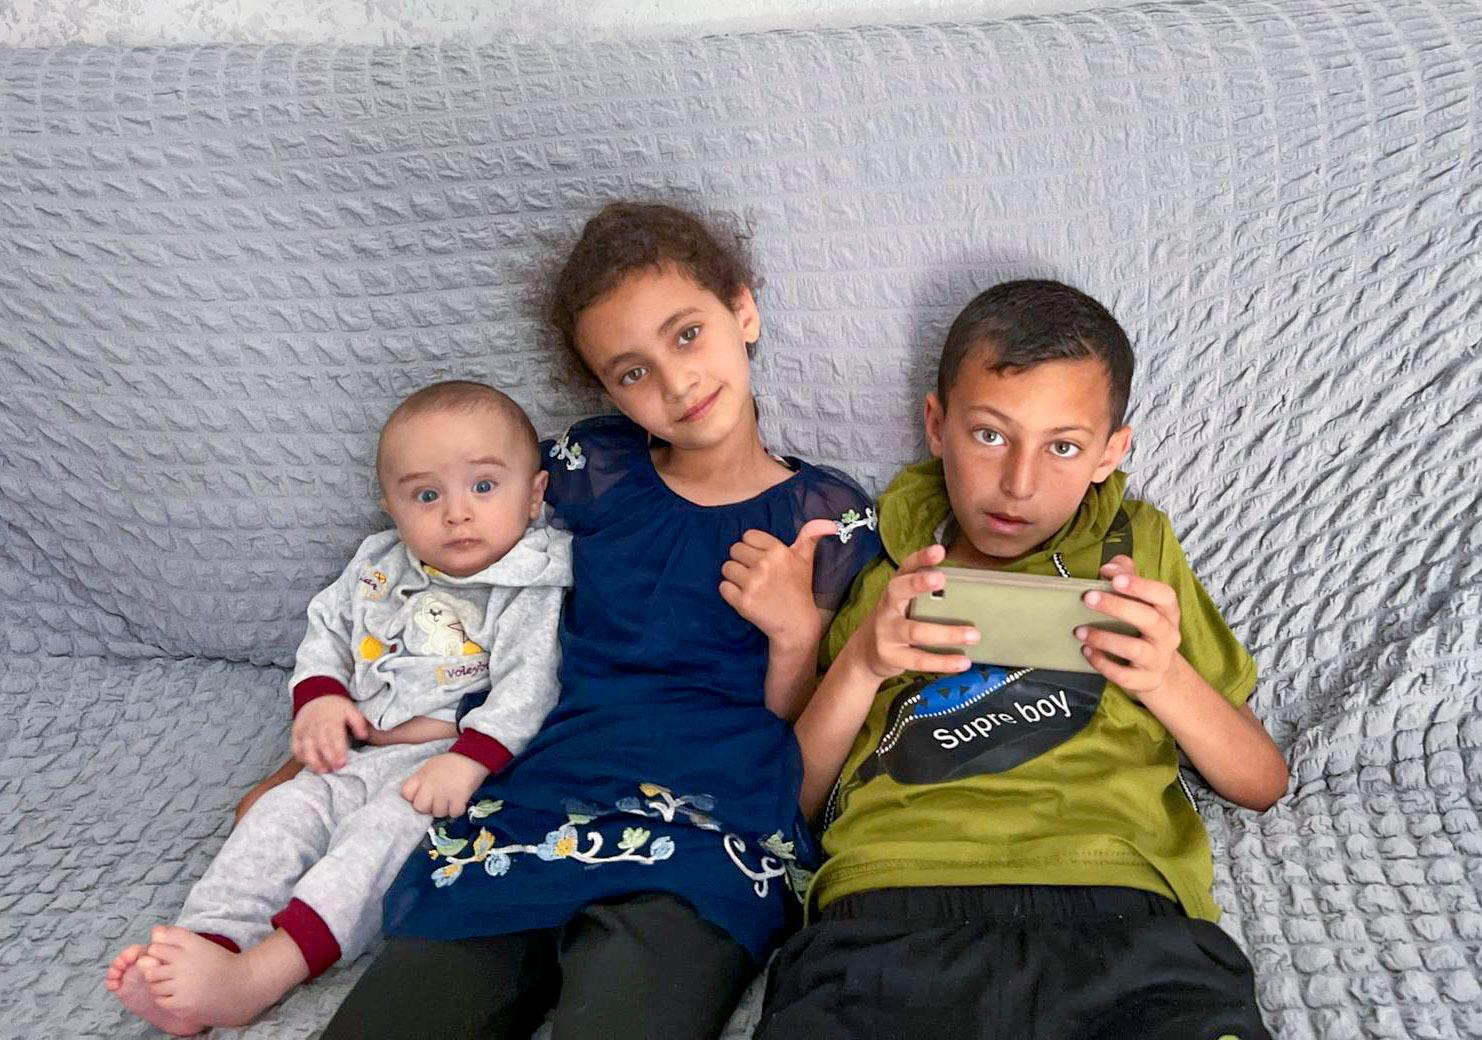 Between the two brothers: Khadija (8) with her two brothers Elias (1) and Jawad (10). 